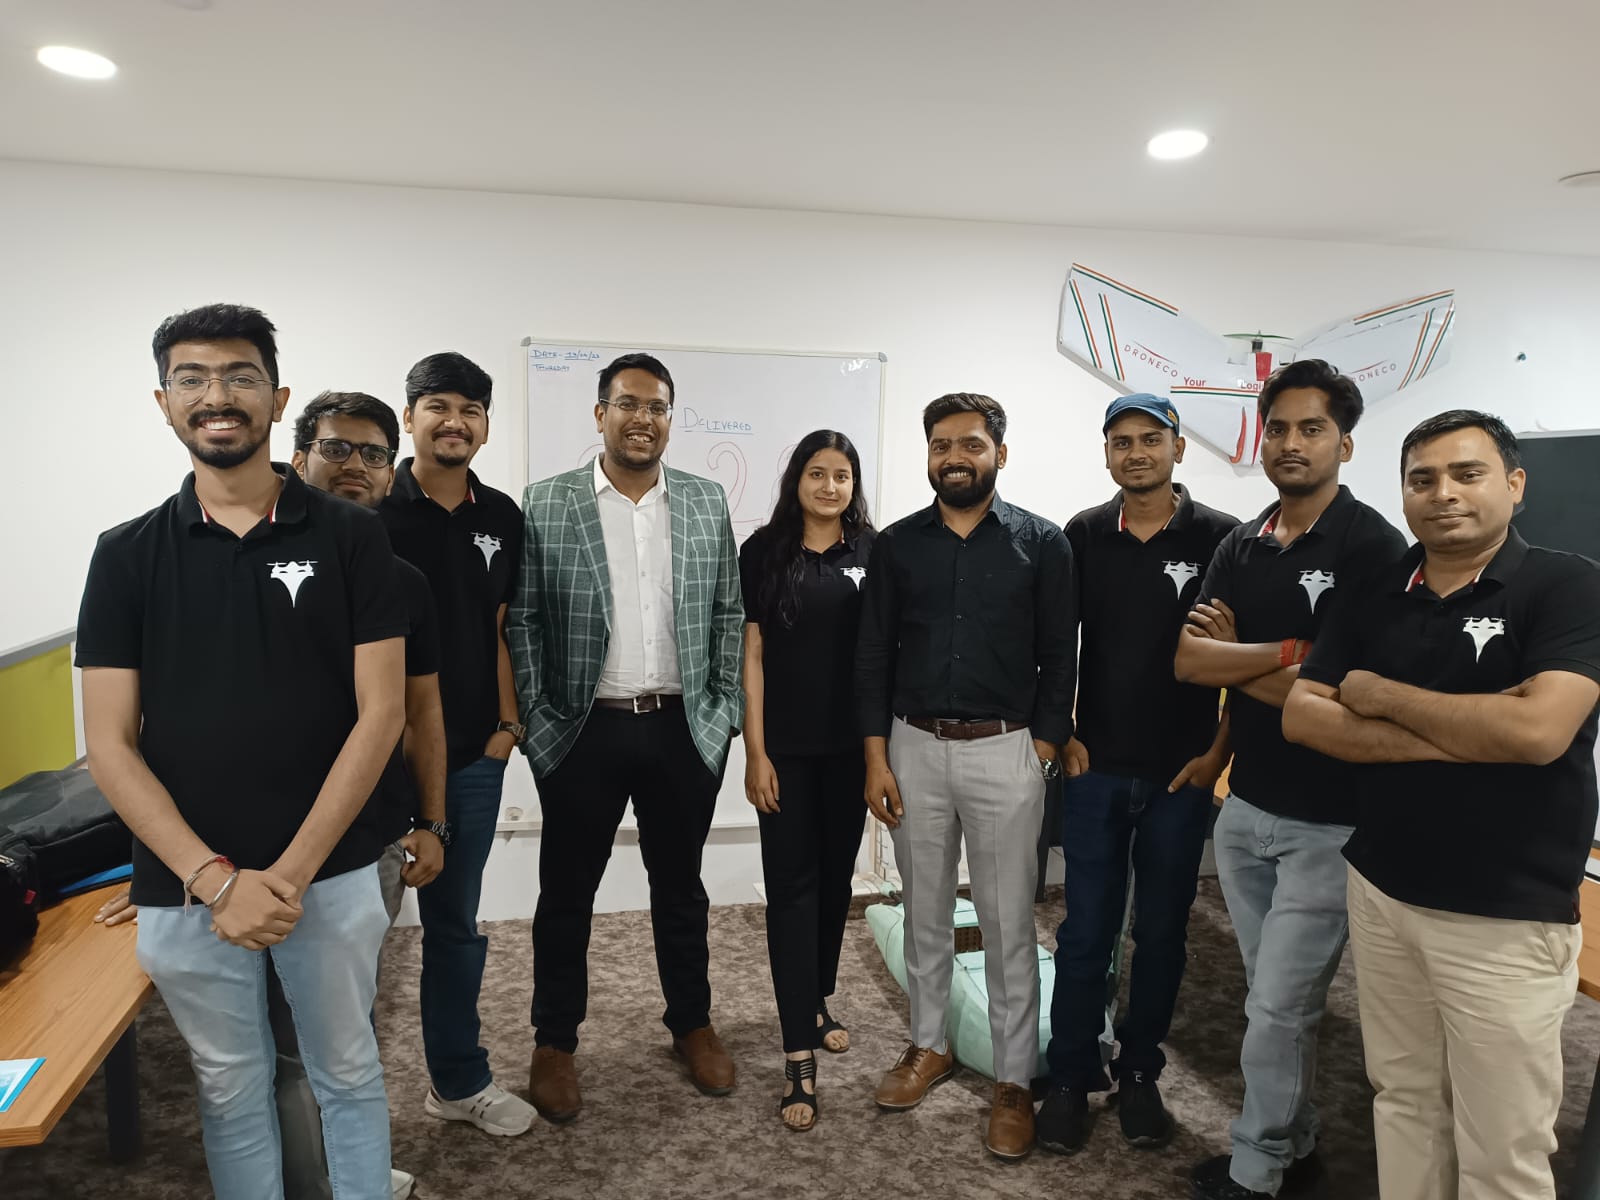 Group photograph of TSAW clients, Drone tech company, developing cutting-edge technologies to power the future of logistics, delivery, and more.